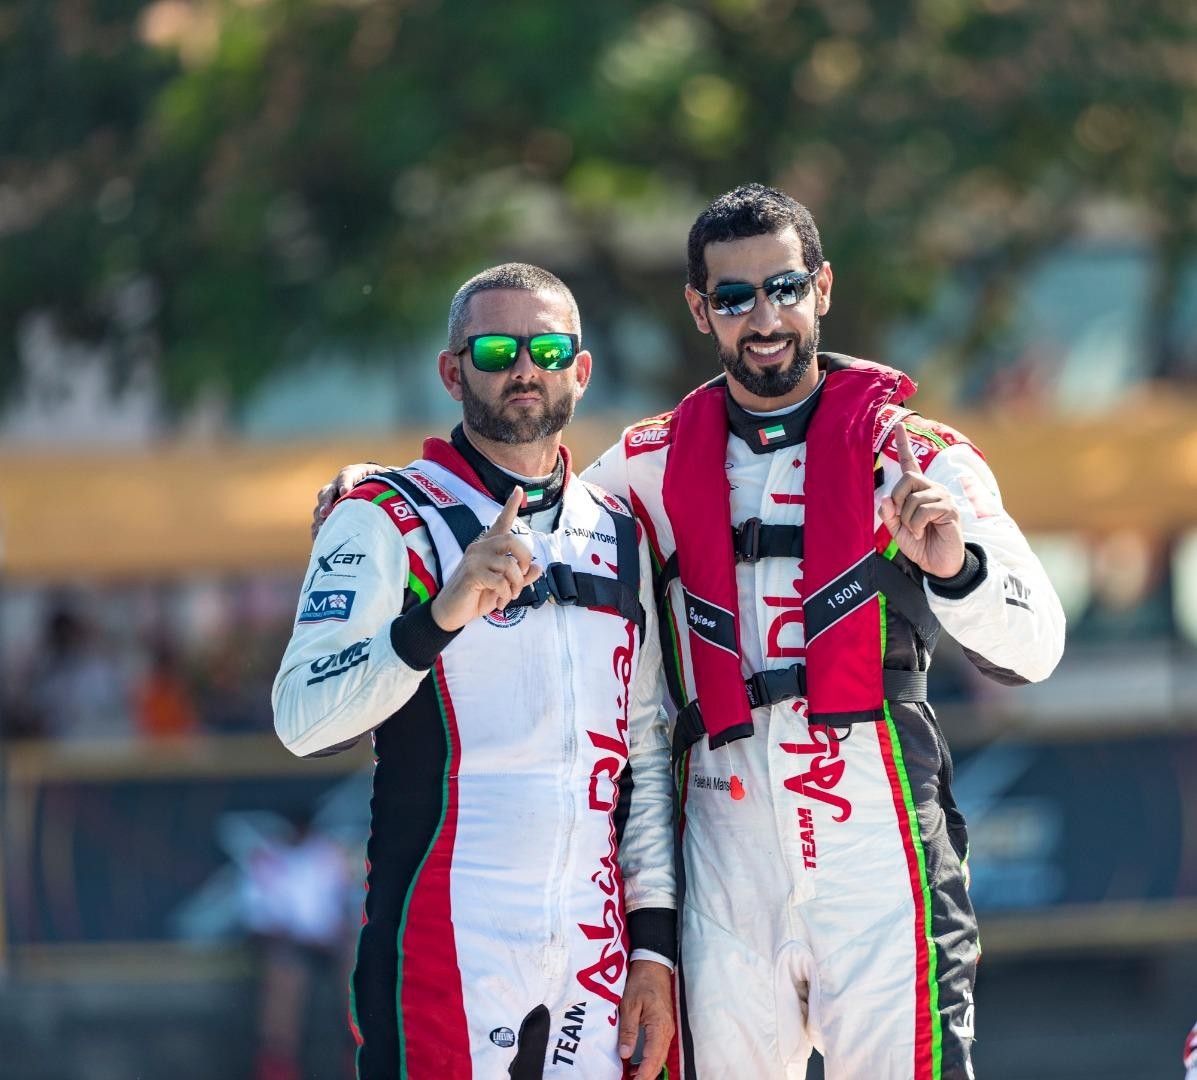 Abu Dhabi 4 at full throttle as they win also race 2 of Stresa Grand Prix